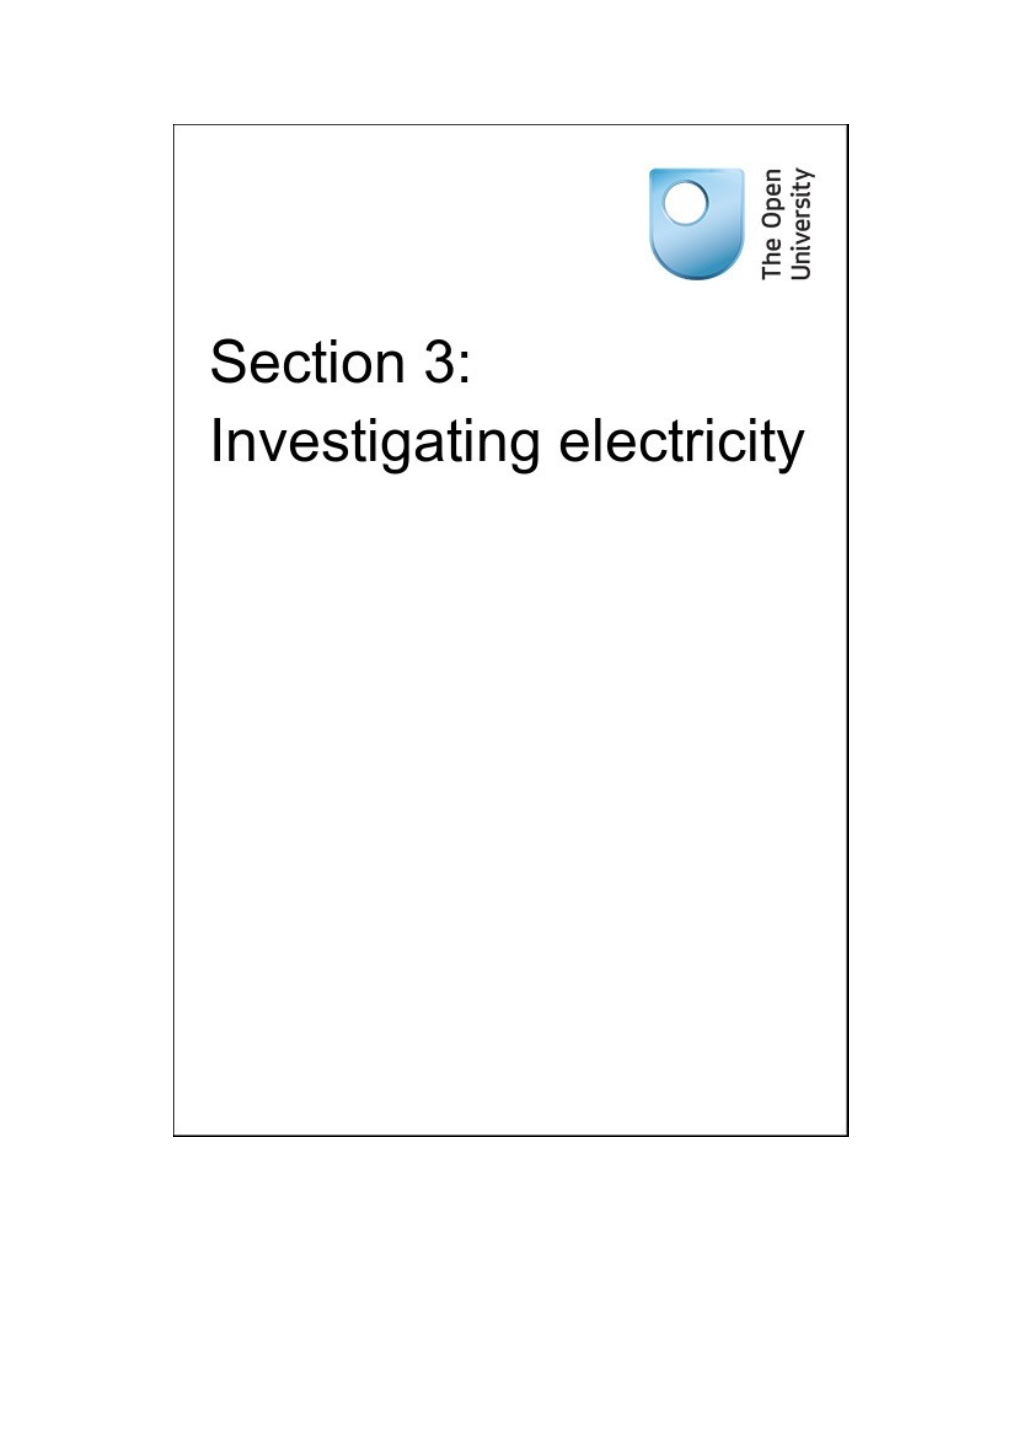 Section 3: Investigating Electricity